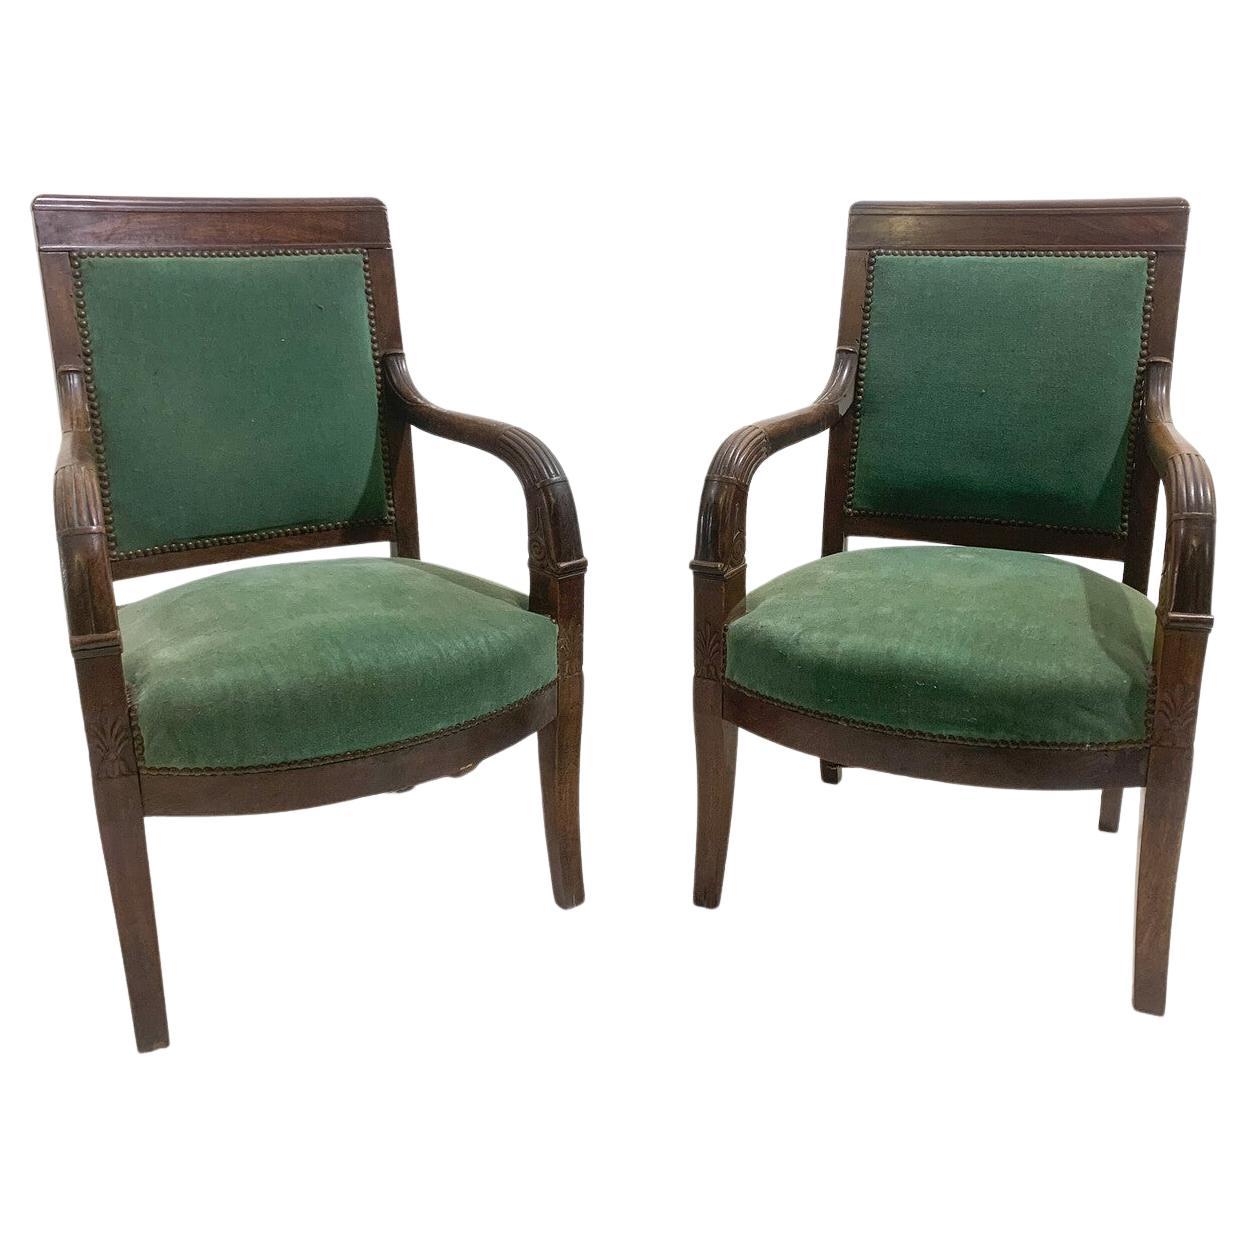 Pair of Green Armchairs, Empire, Mahogany, 19th Century For Sale